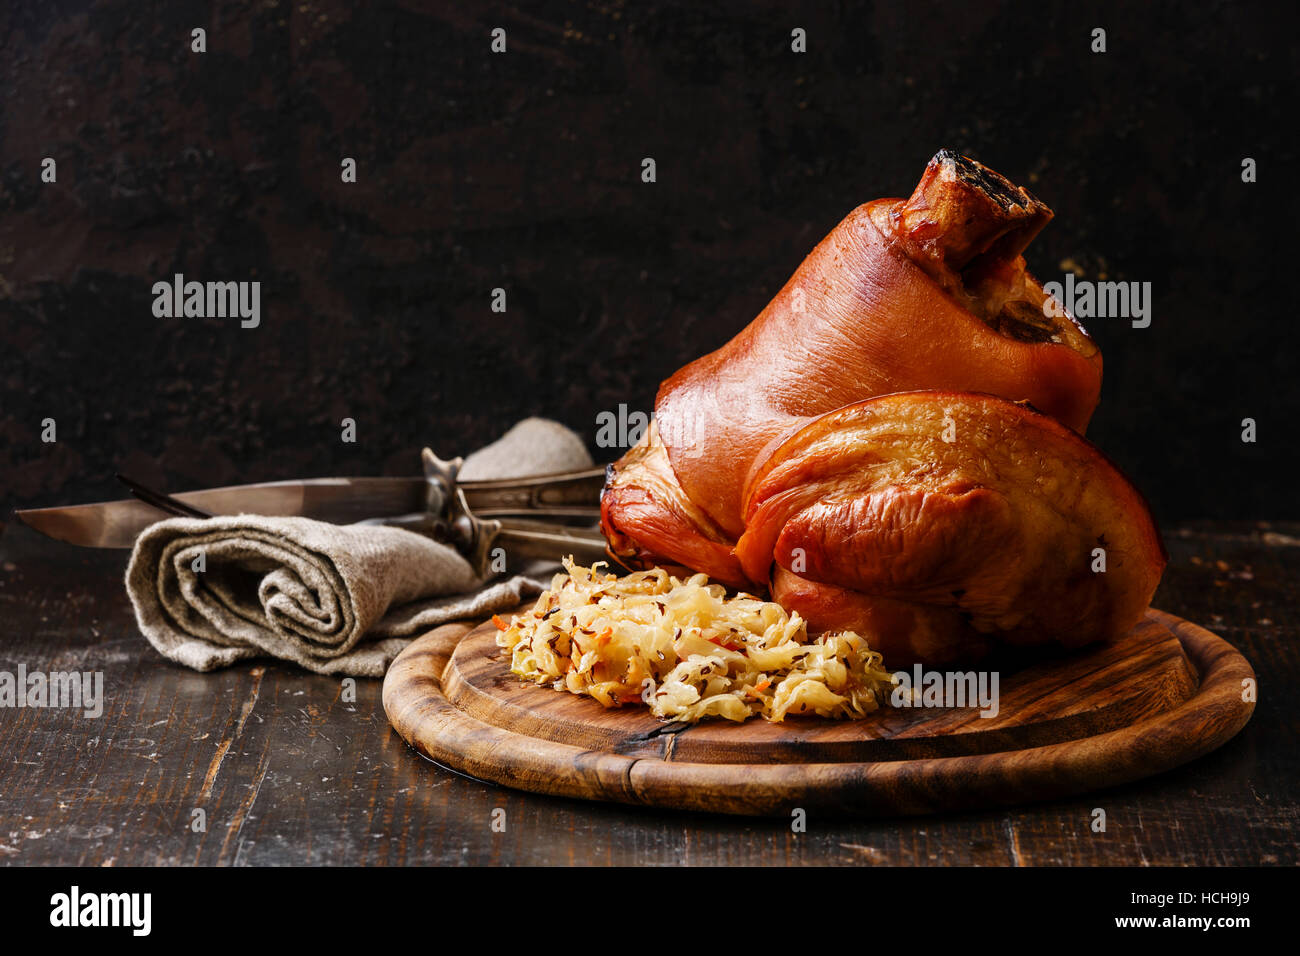 Roasted pork knuckle eisbein with braised boiled cabbage on wooden cutting board Stock Photo